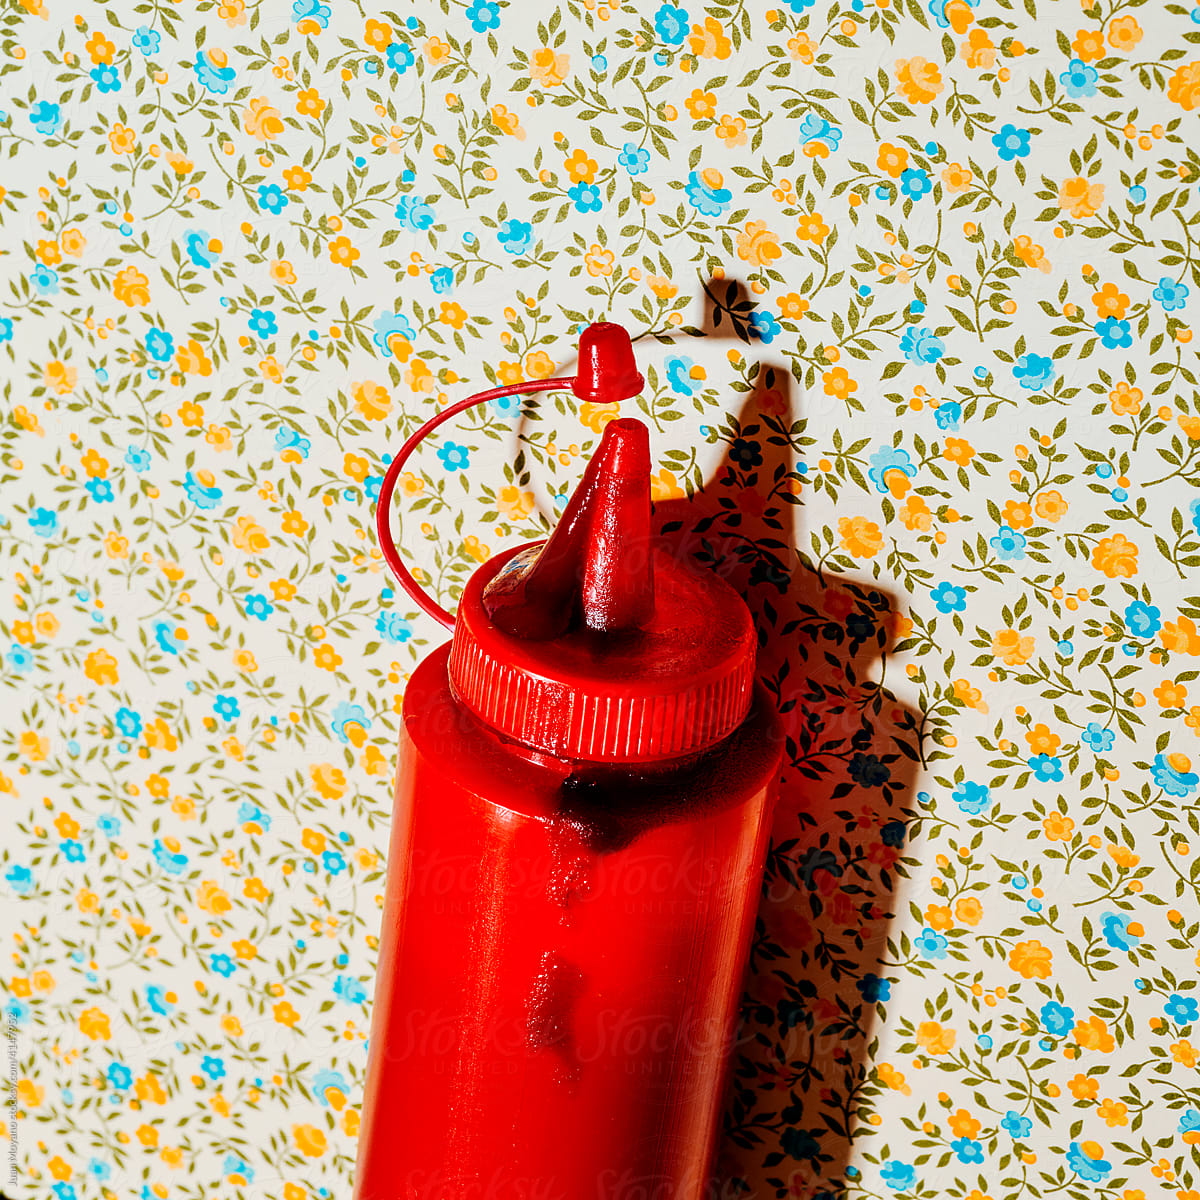 dirty ketchup bottle on a floral background